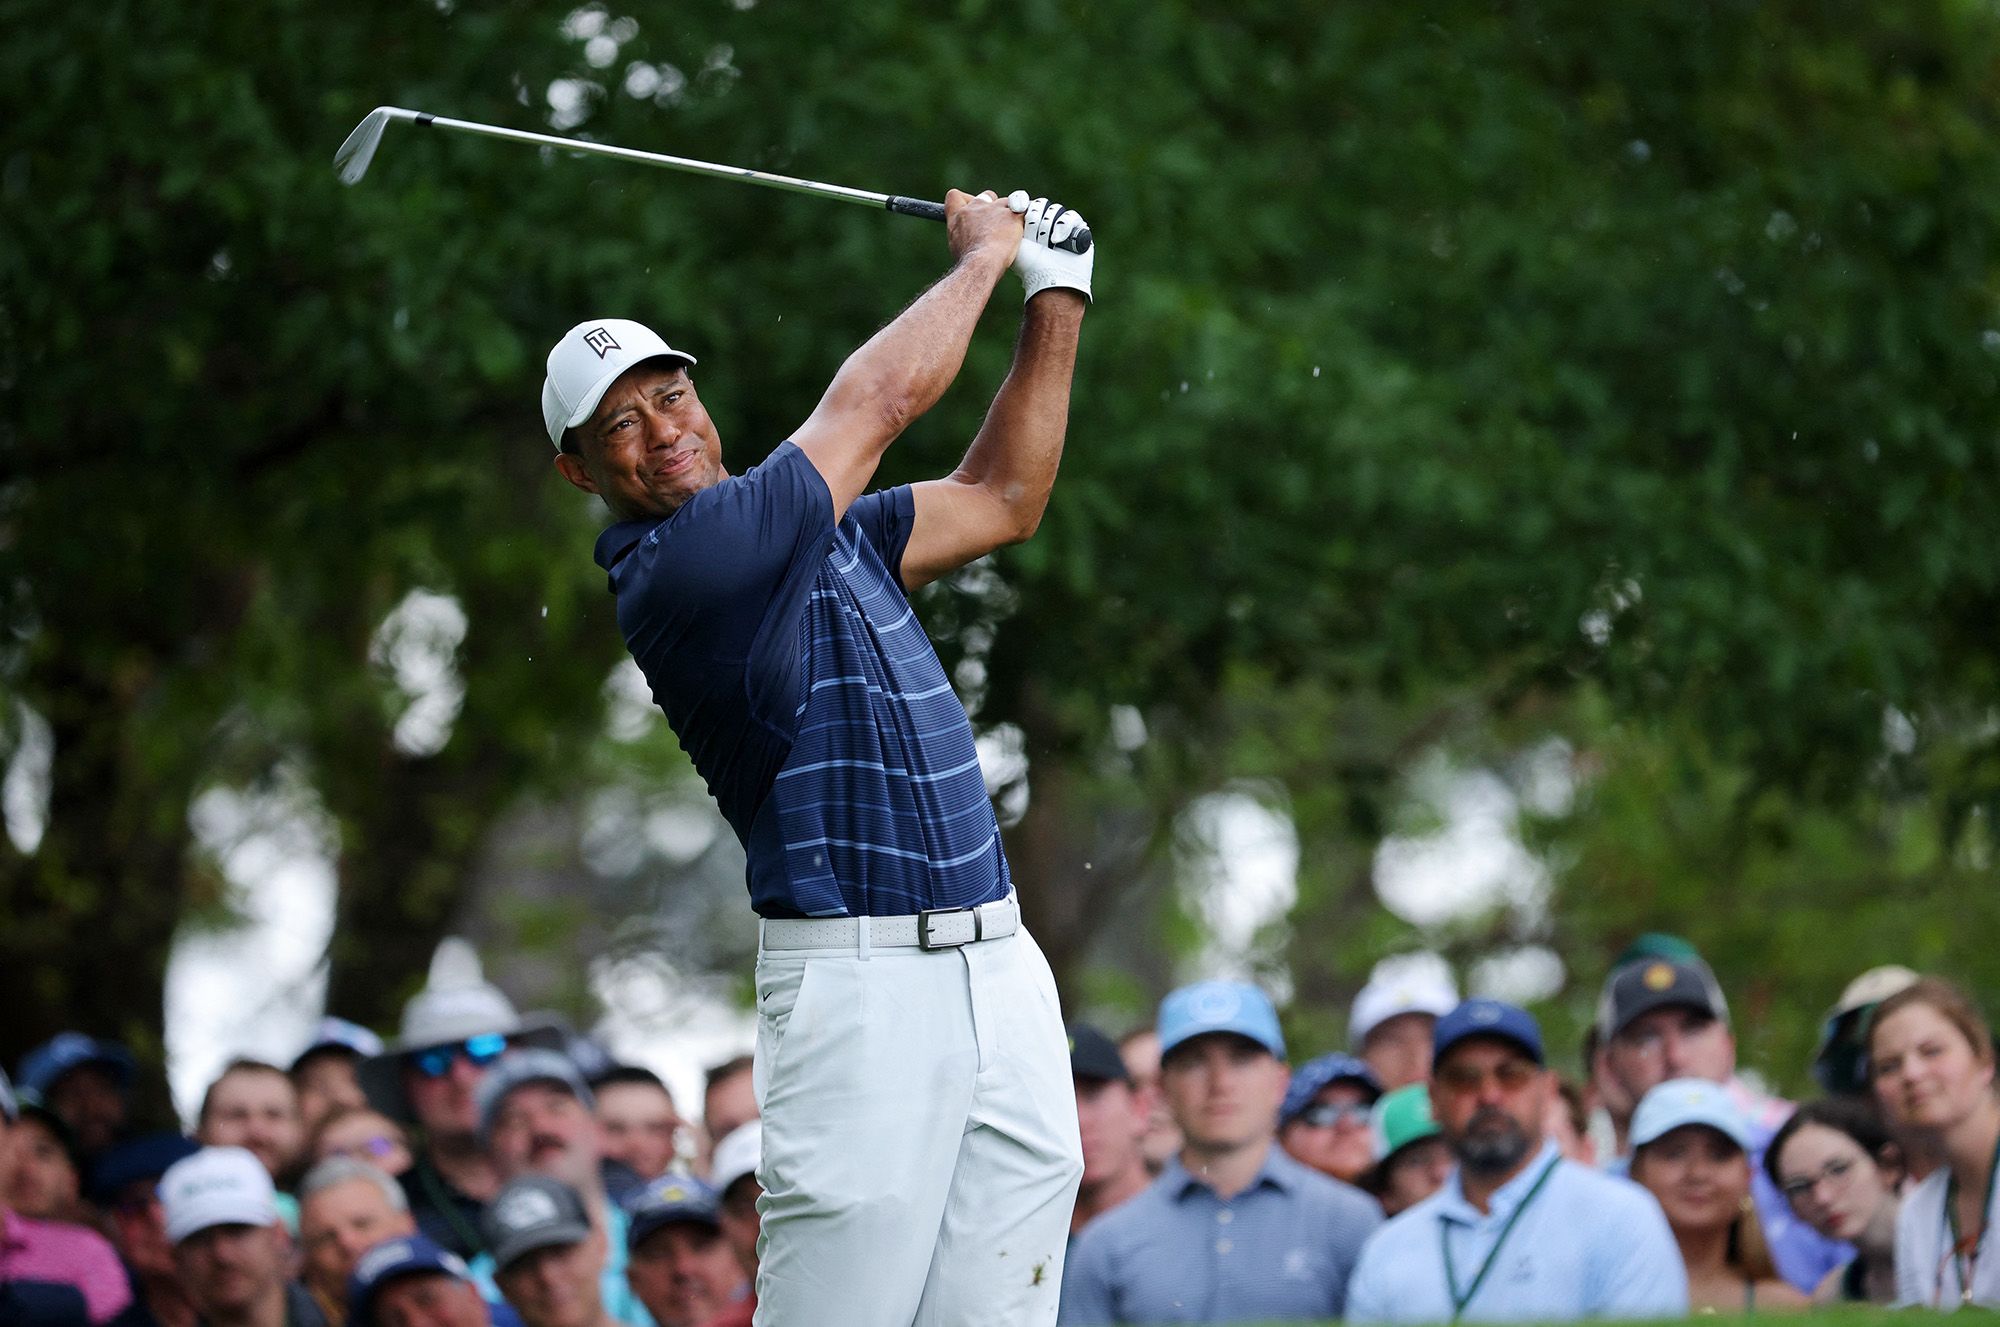 Tiger Woods on return from surgery: 'On the good side now' - Yahoo Sports